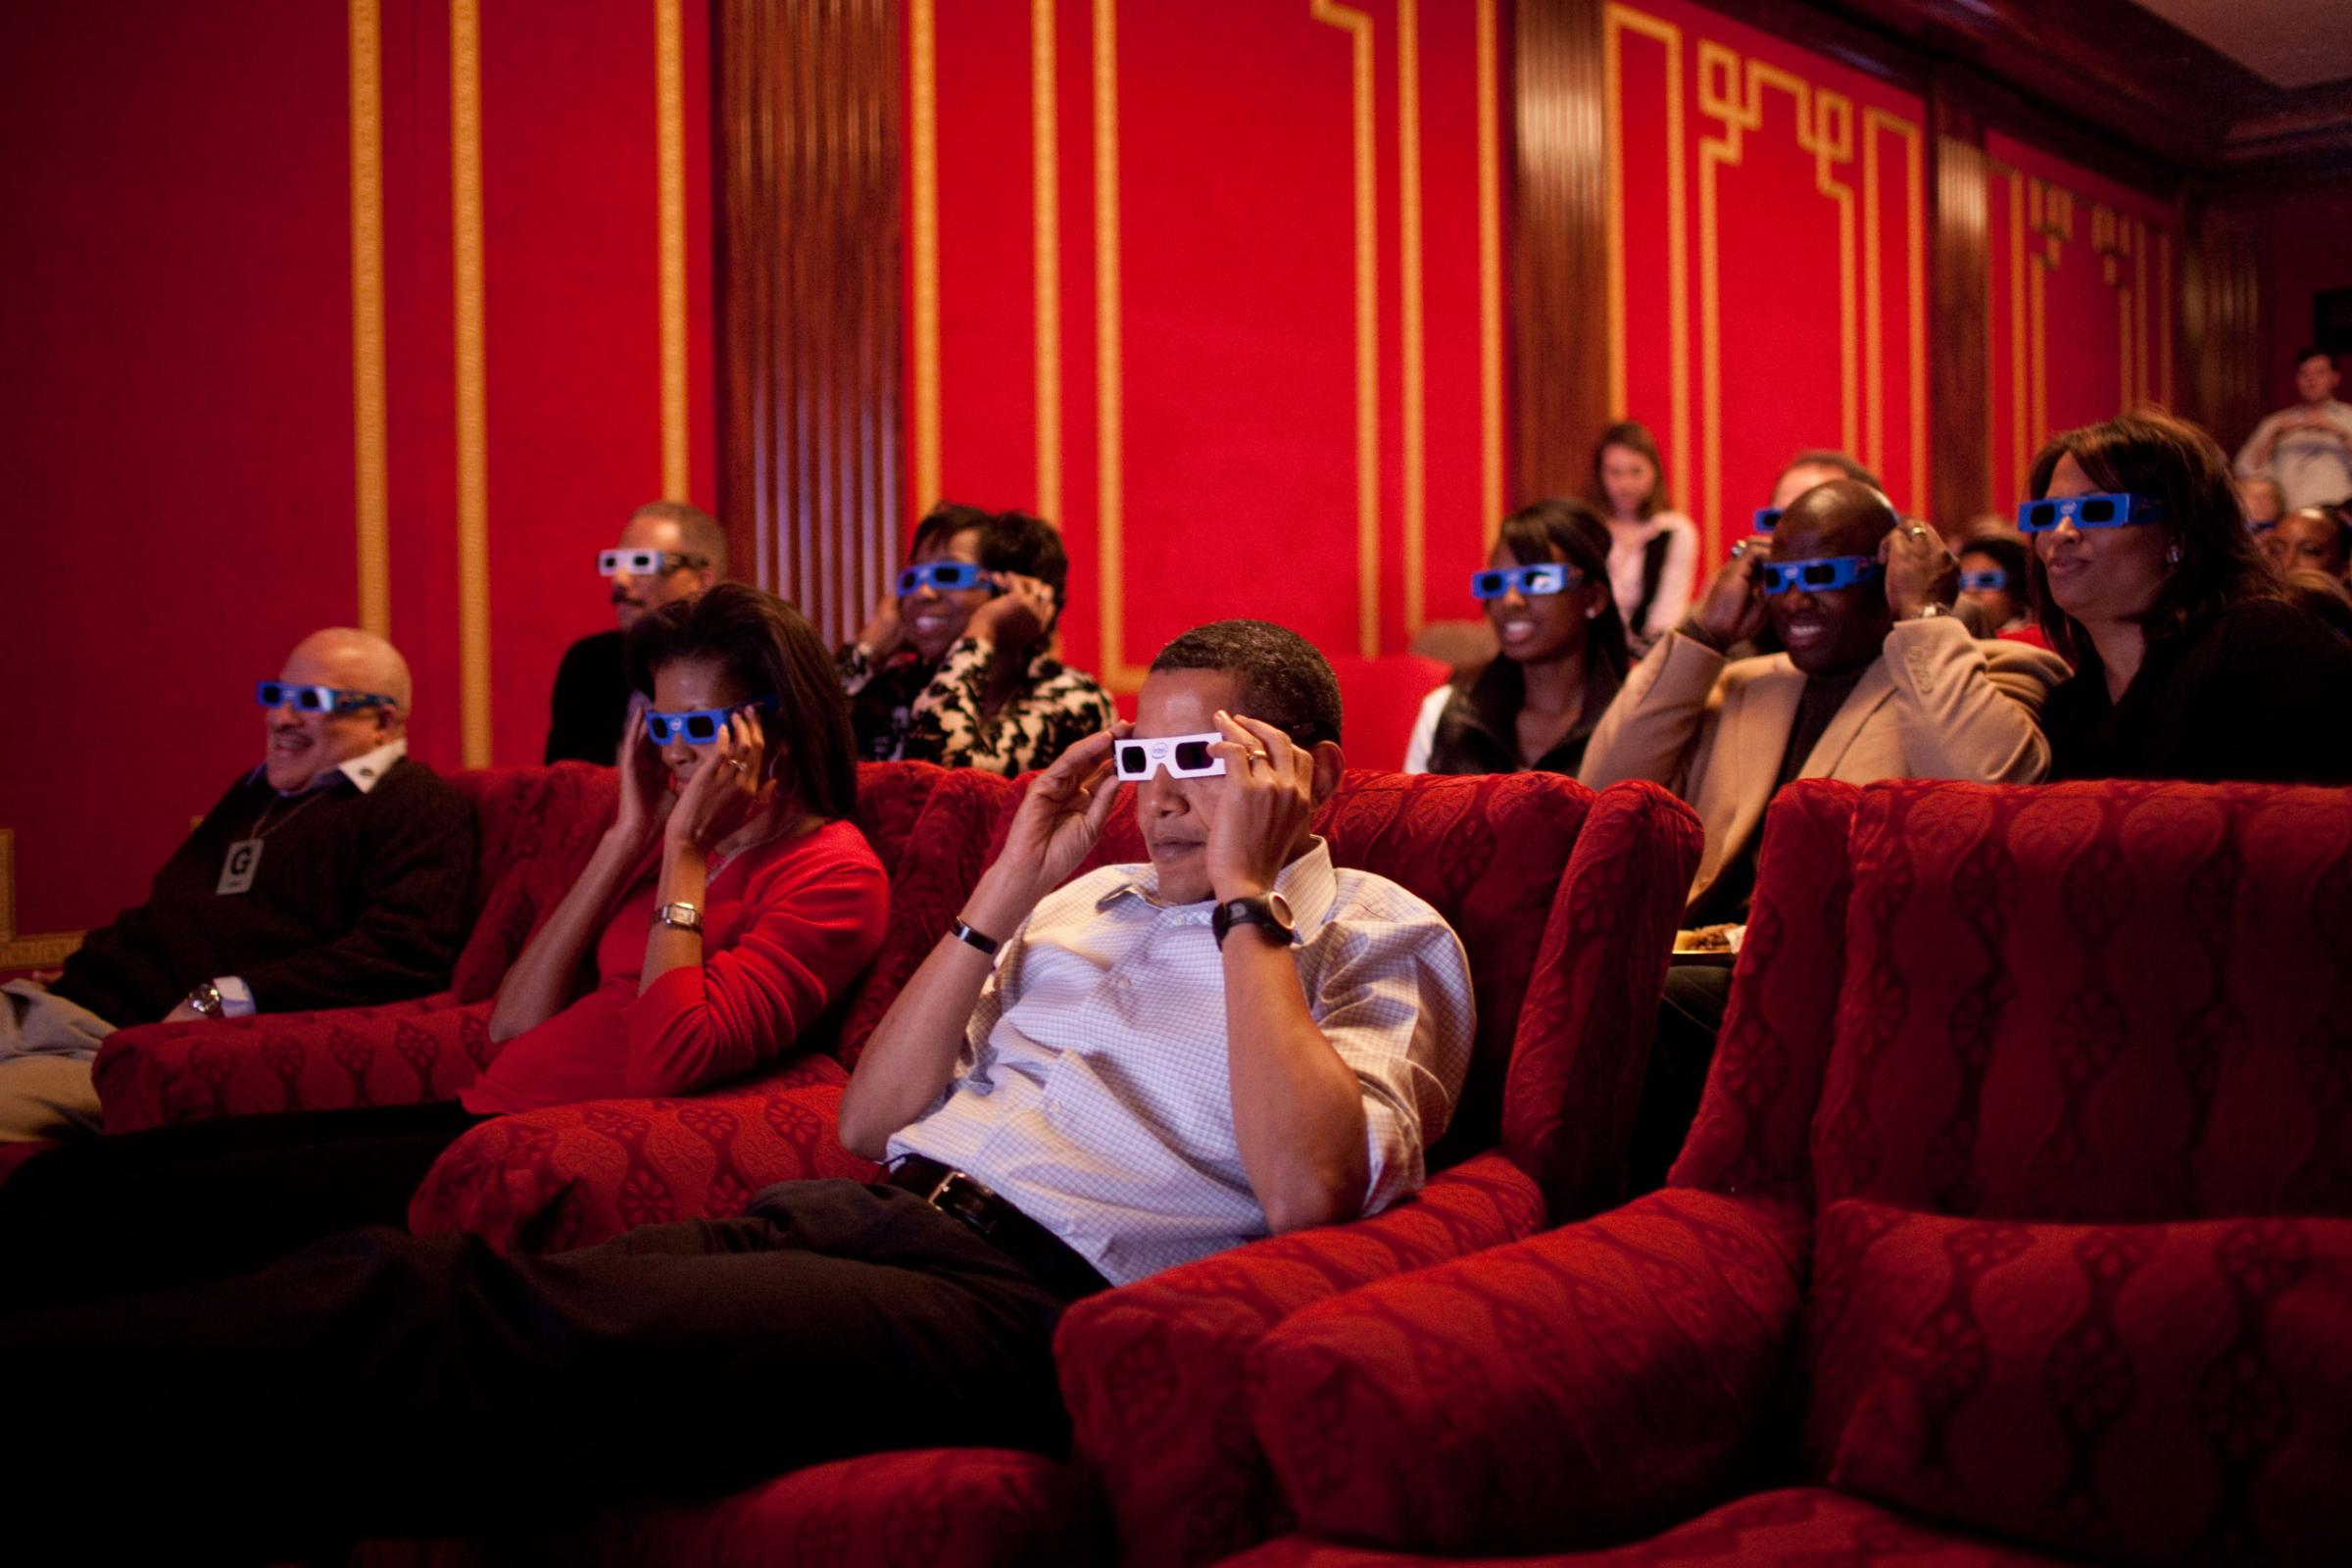 The President and First Lady, along with friends and family, watch a 3D commercial during the Super Bowl, Feb. 1, 2009.